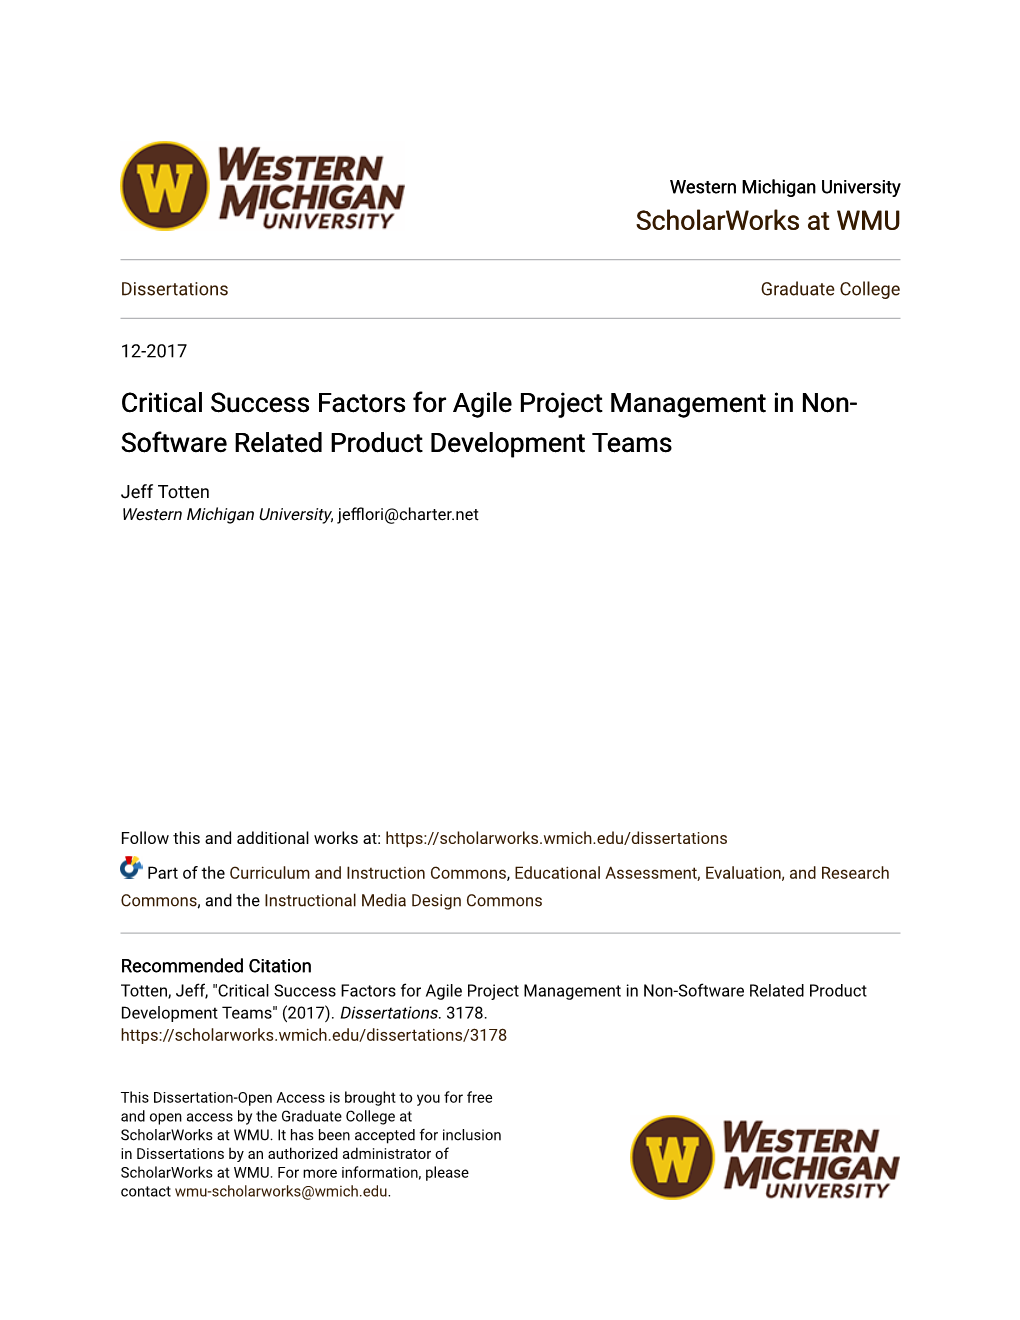 Critical Success Factors for Agile Project Management in Non- Software Related Product Development Teams